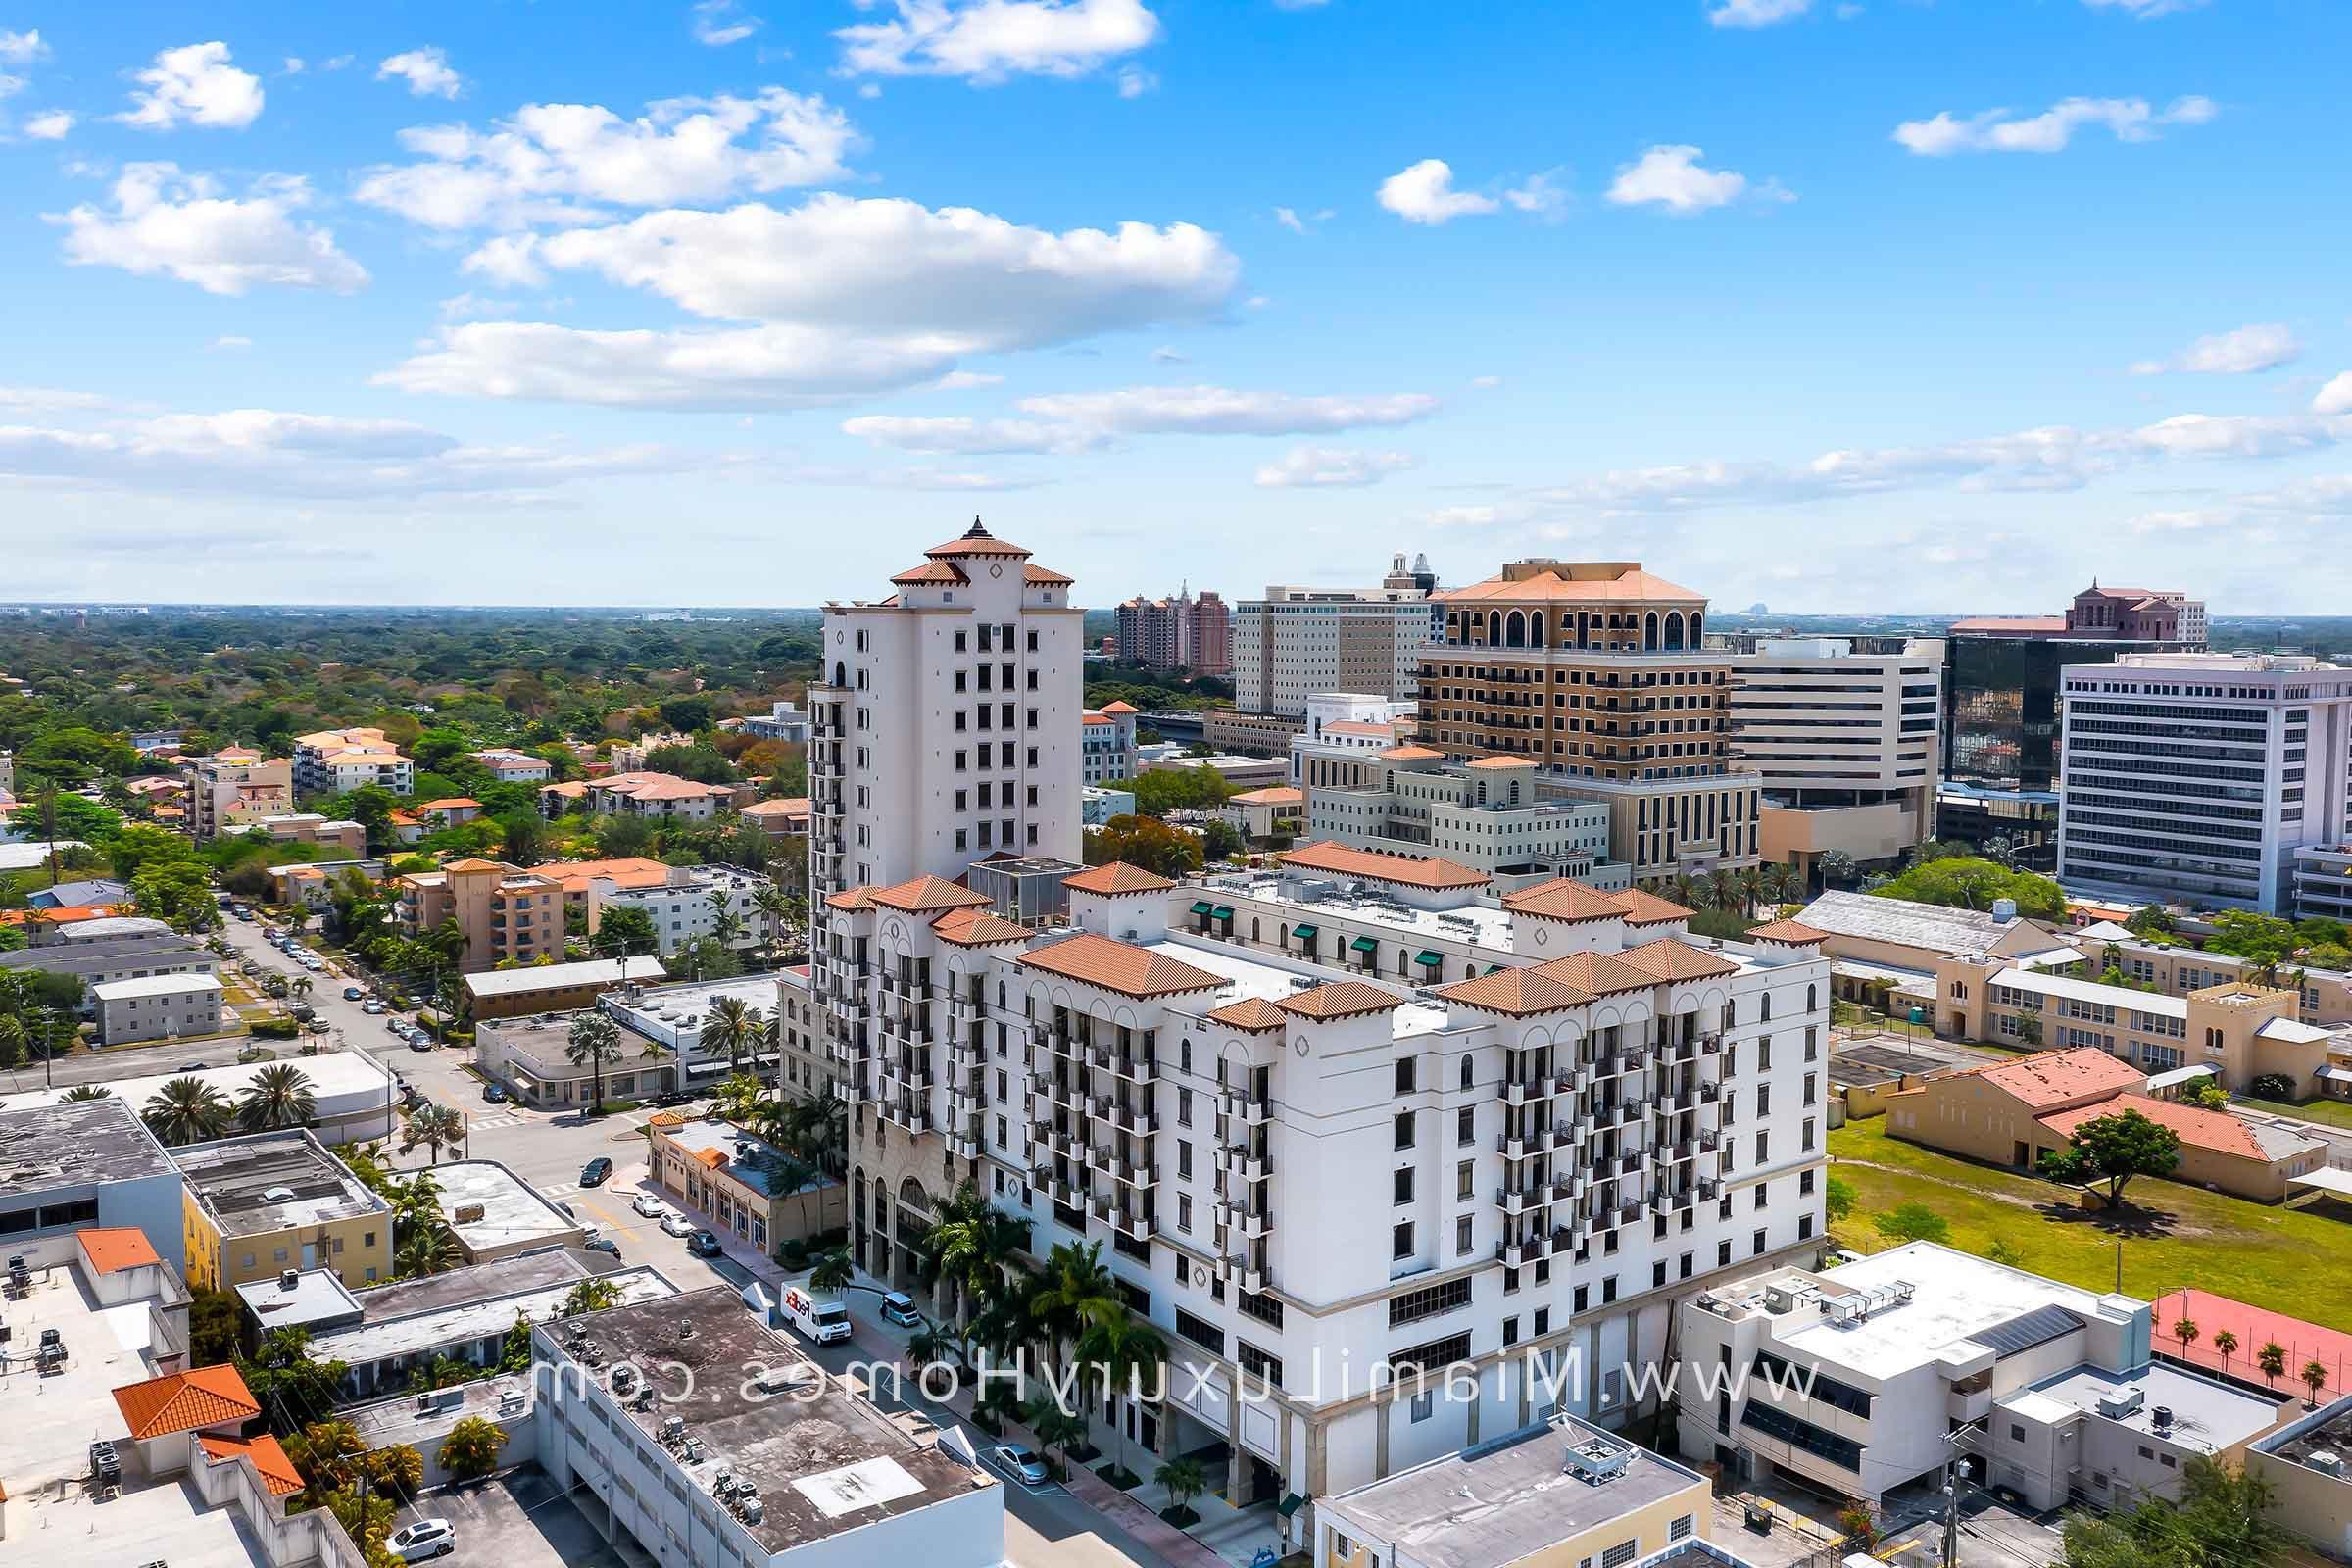 Ponce Tower Condos in Coral Gables